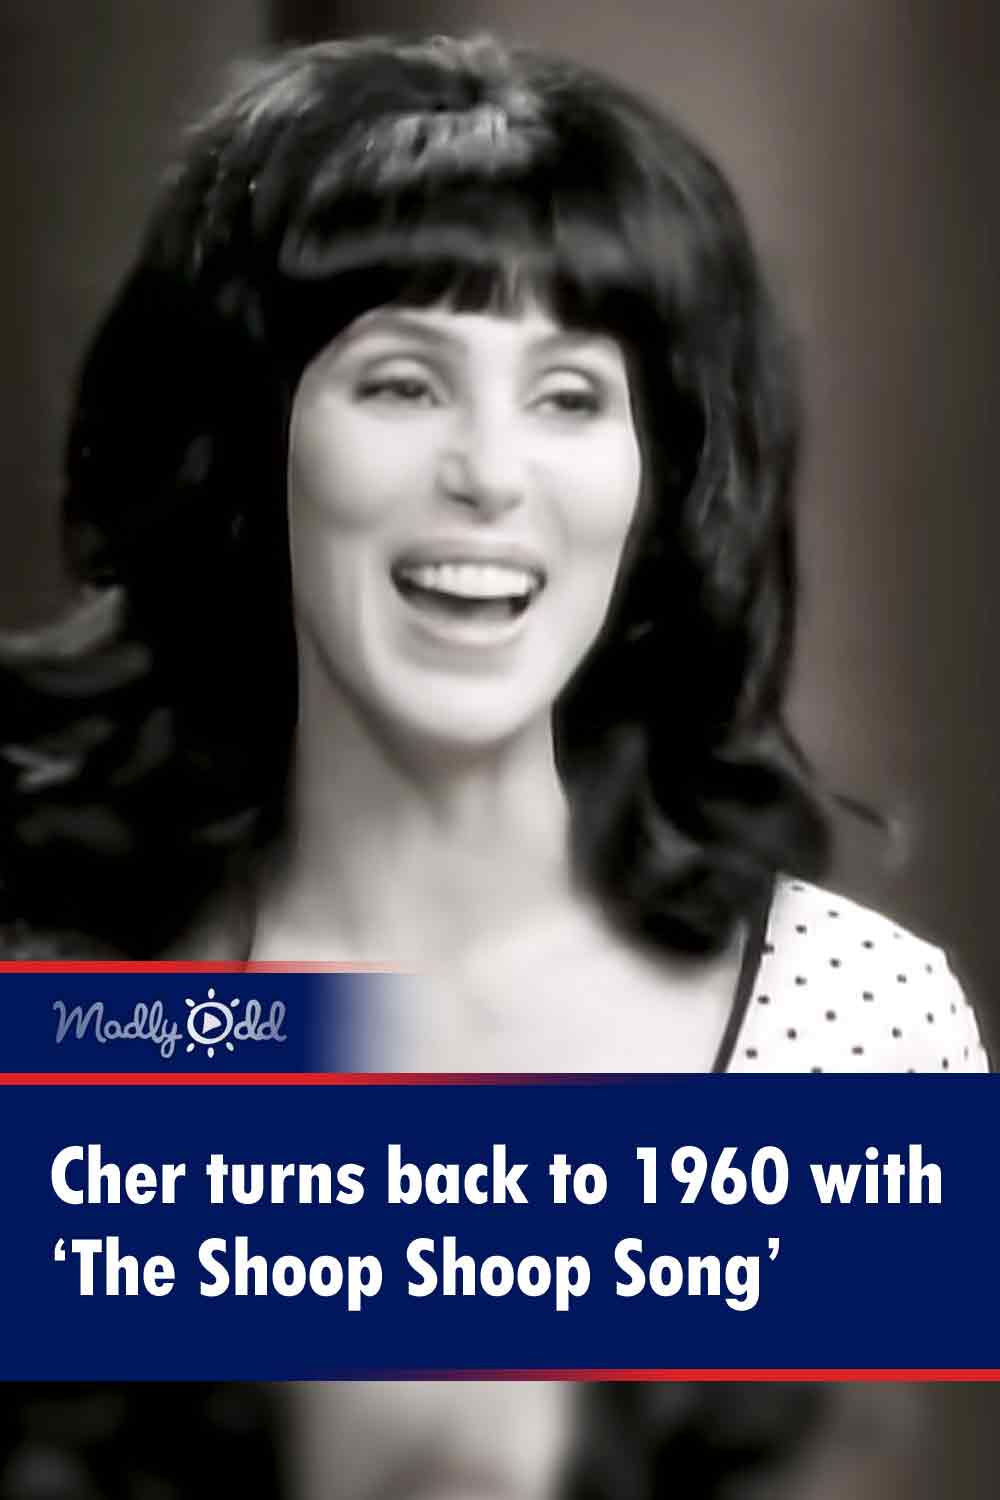 Cher turns back to 1960 with ‘The Shoop Shoop Song’